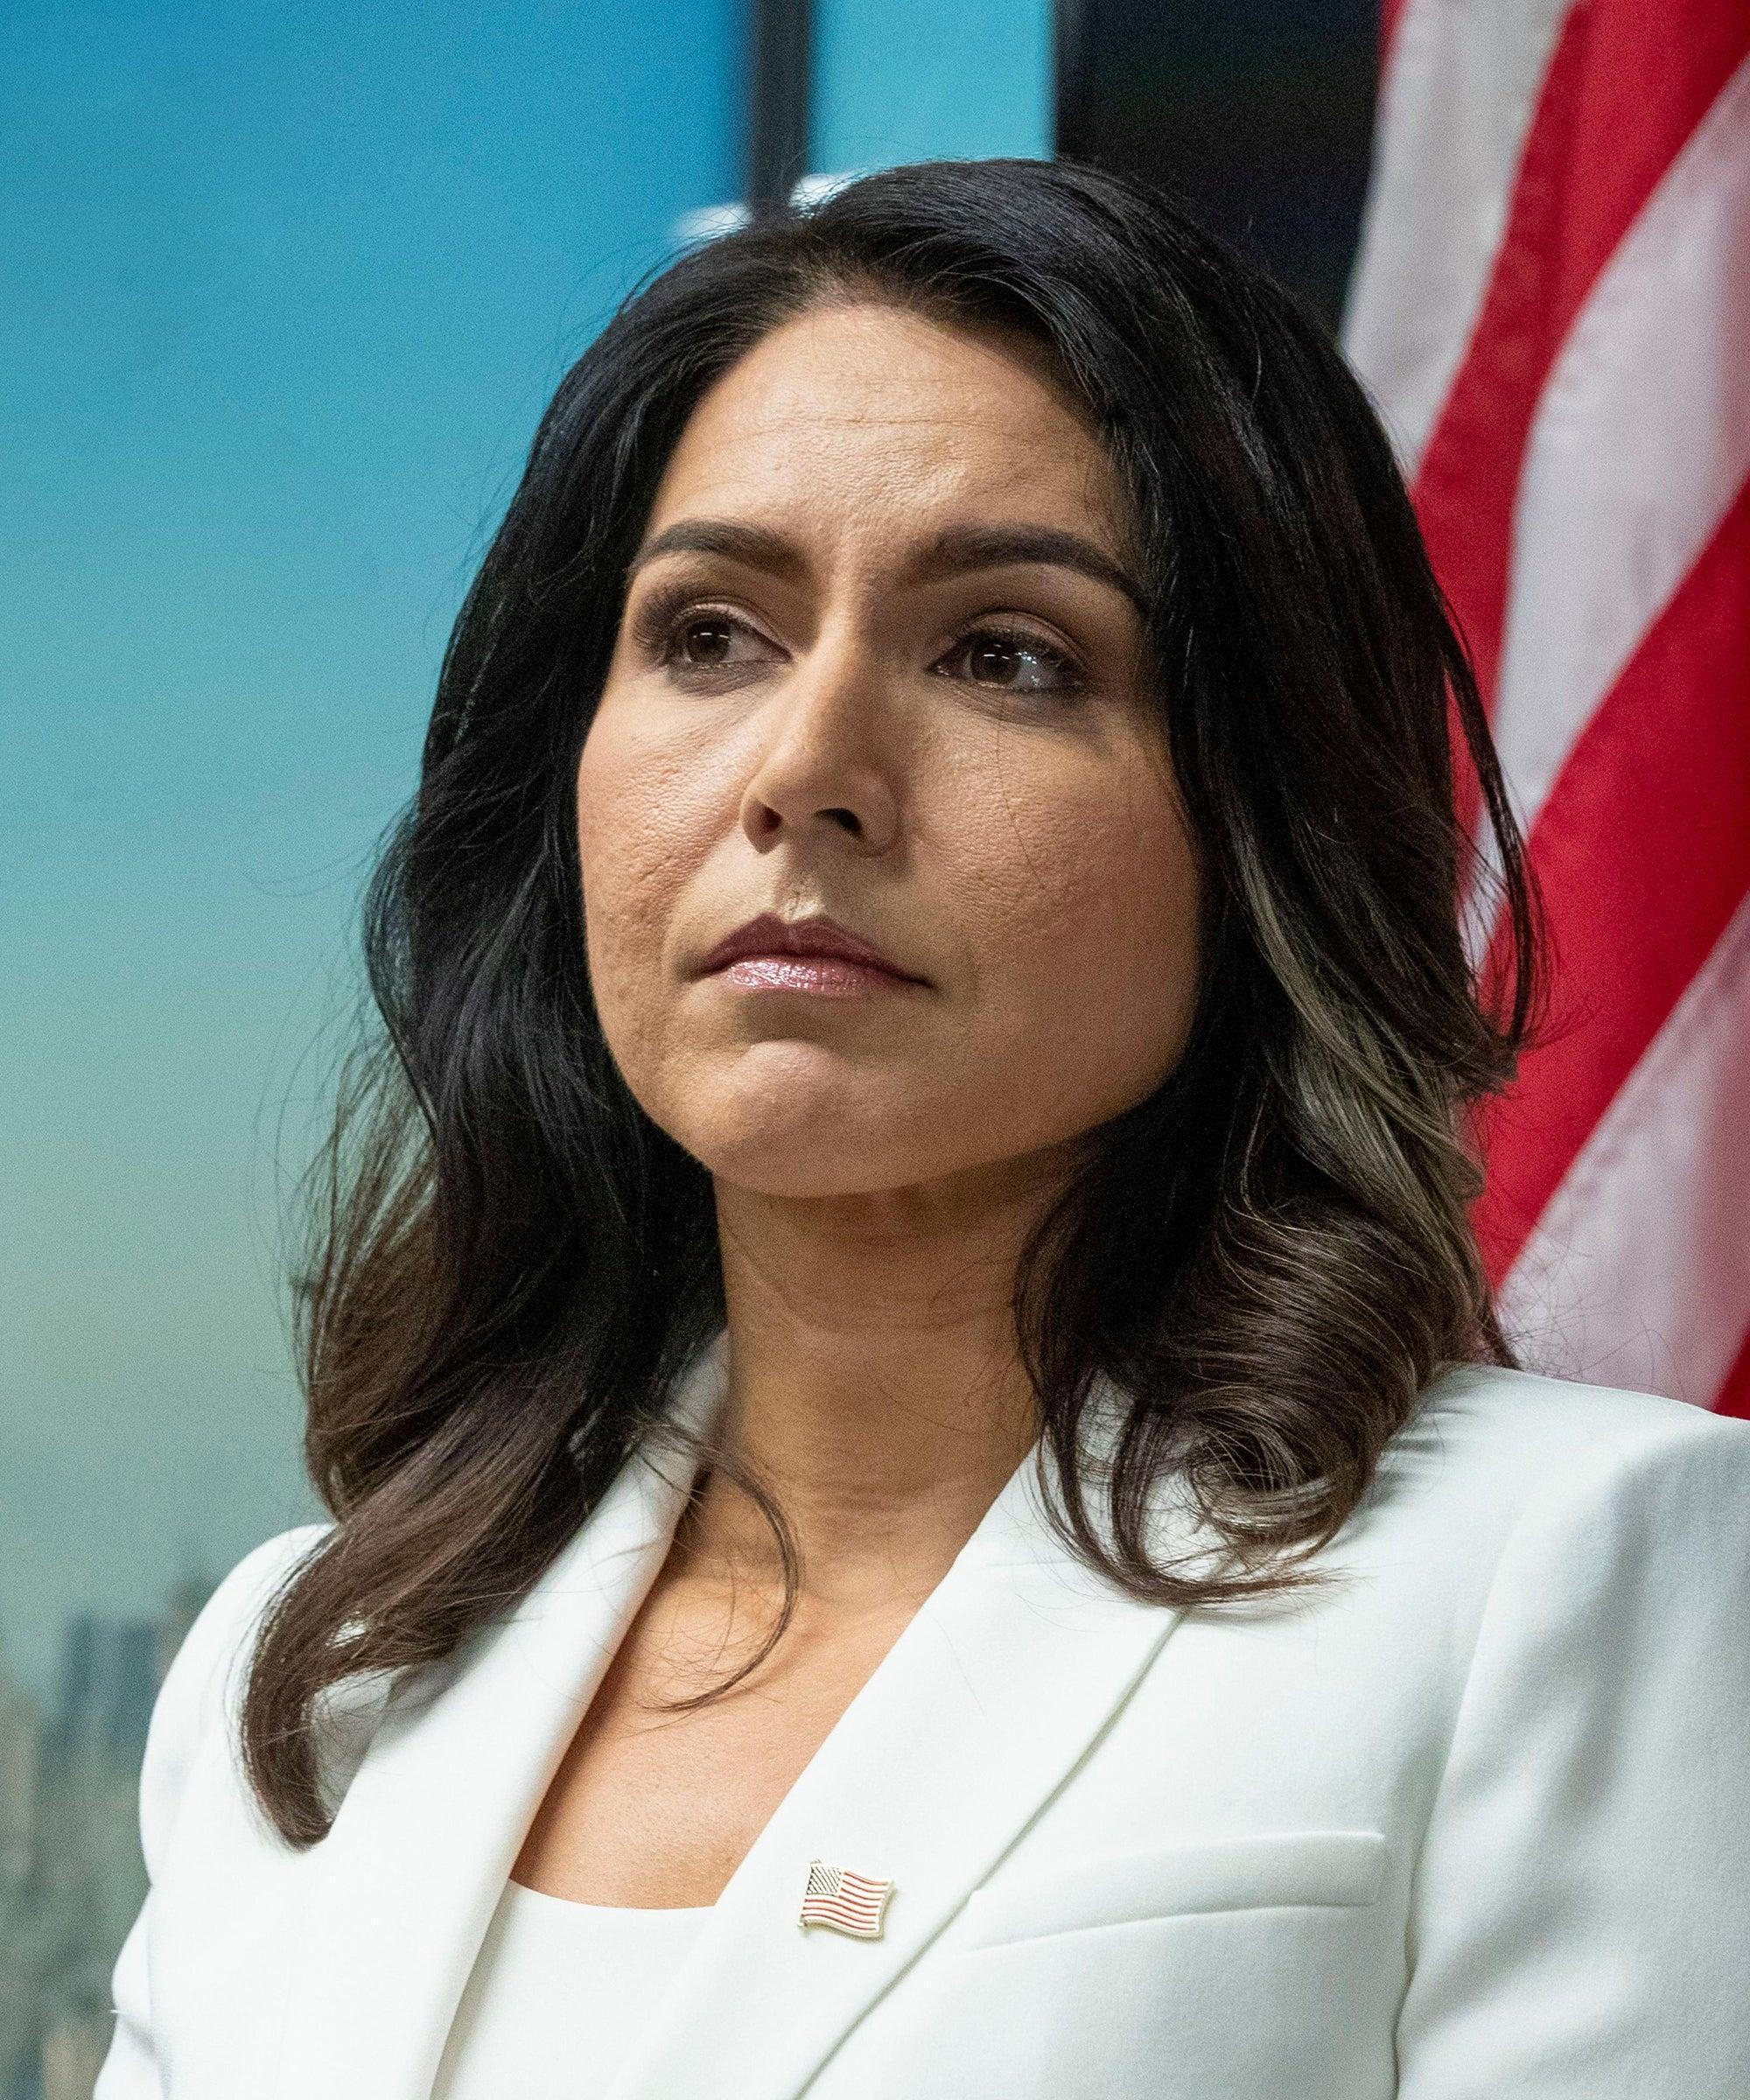 Hot Pictures Of Tulsi Gabbard Are Blessing From God To People The Viraler